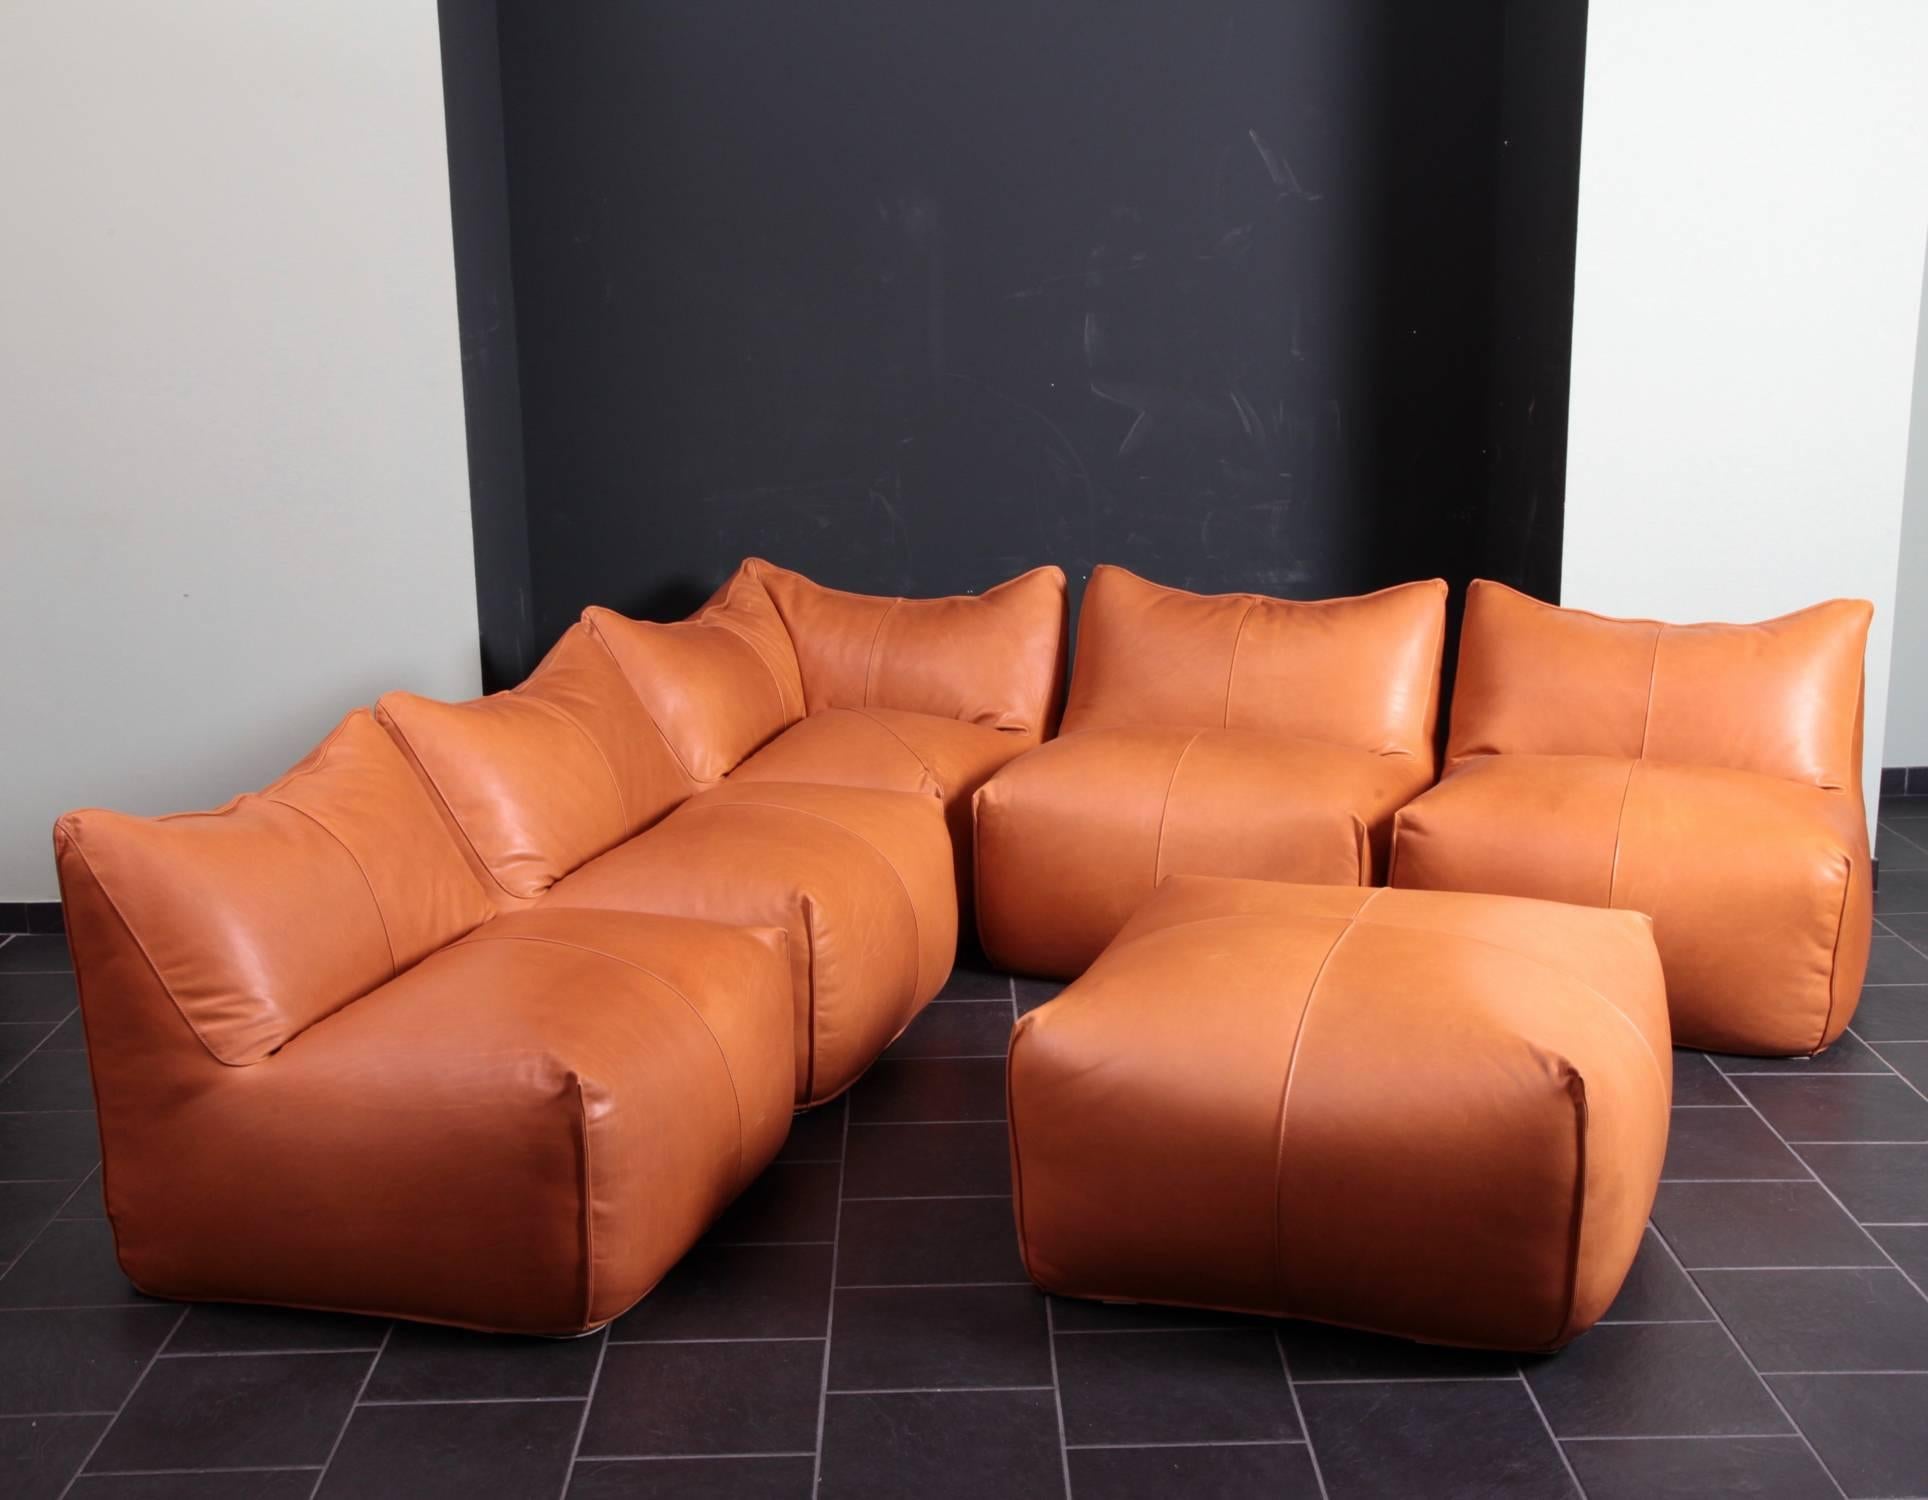 New upholstered set with one corner piece, four lounge chairs and one ottoman pouf. The set is upholstered in a high quality aniline tan leather. We had to replace some of the bottom fabrics due to condition. It is also possible to connect the pcs